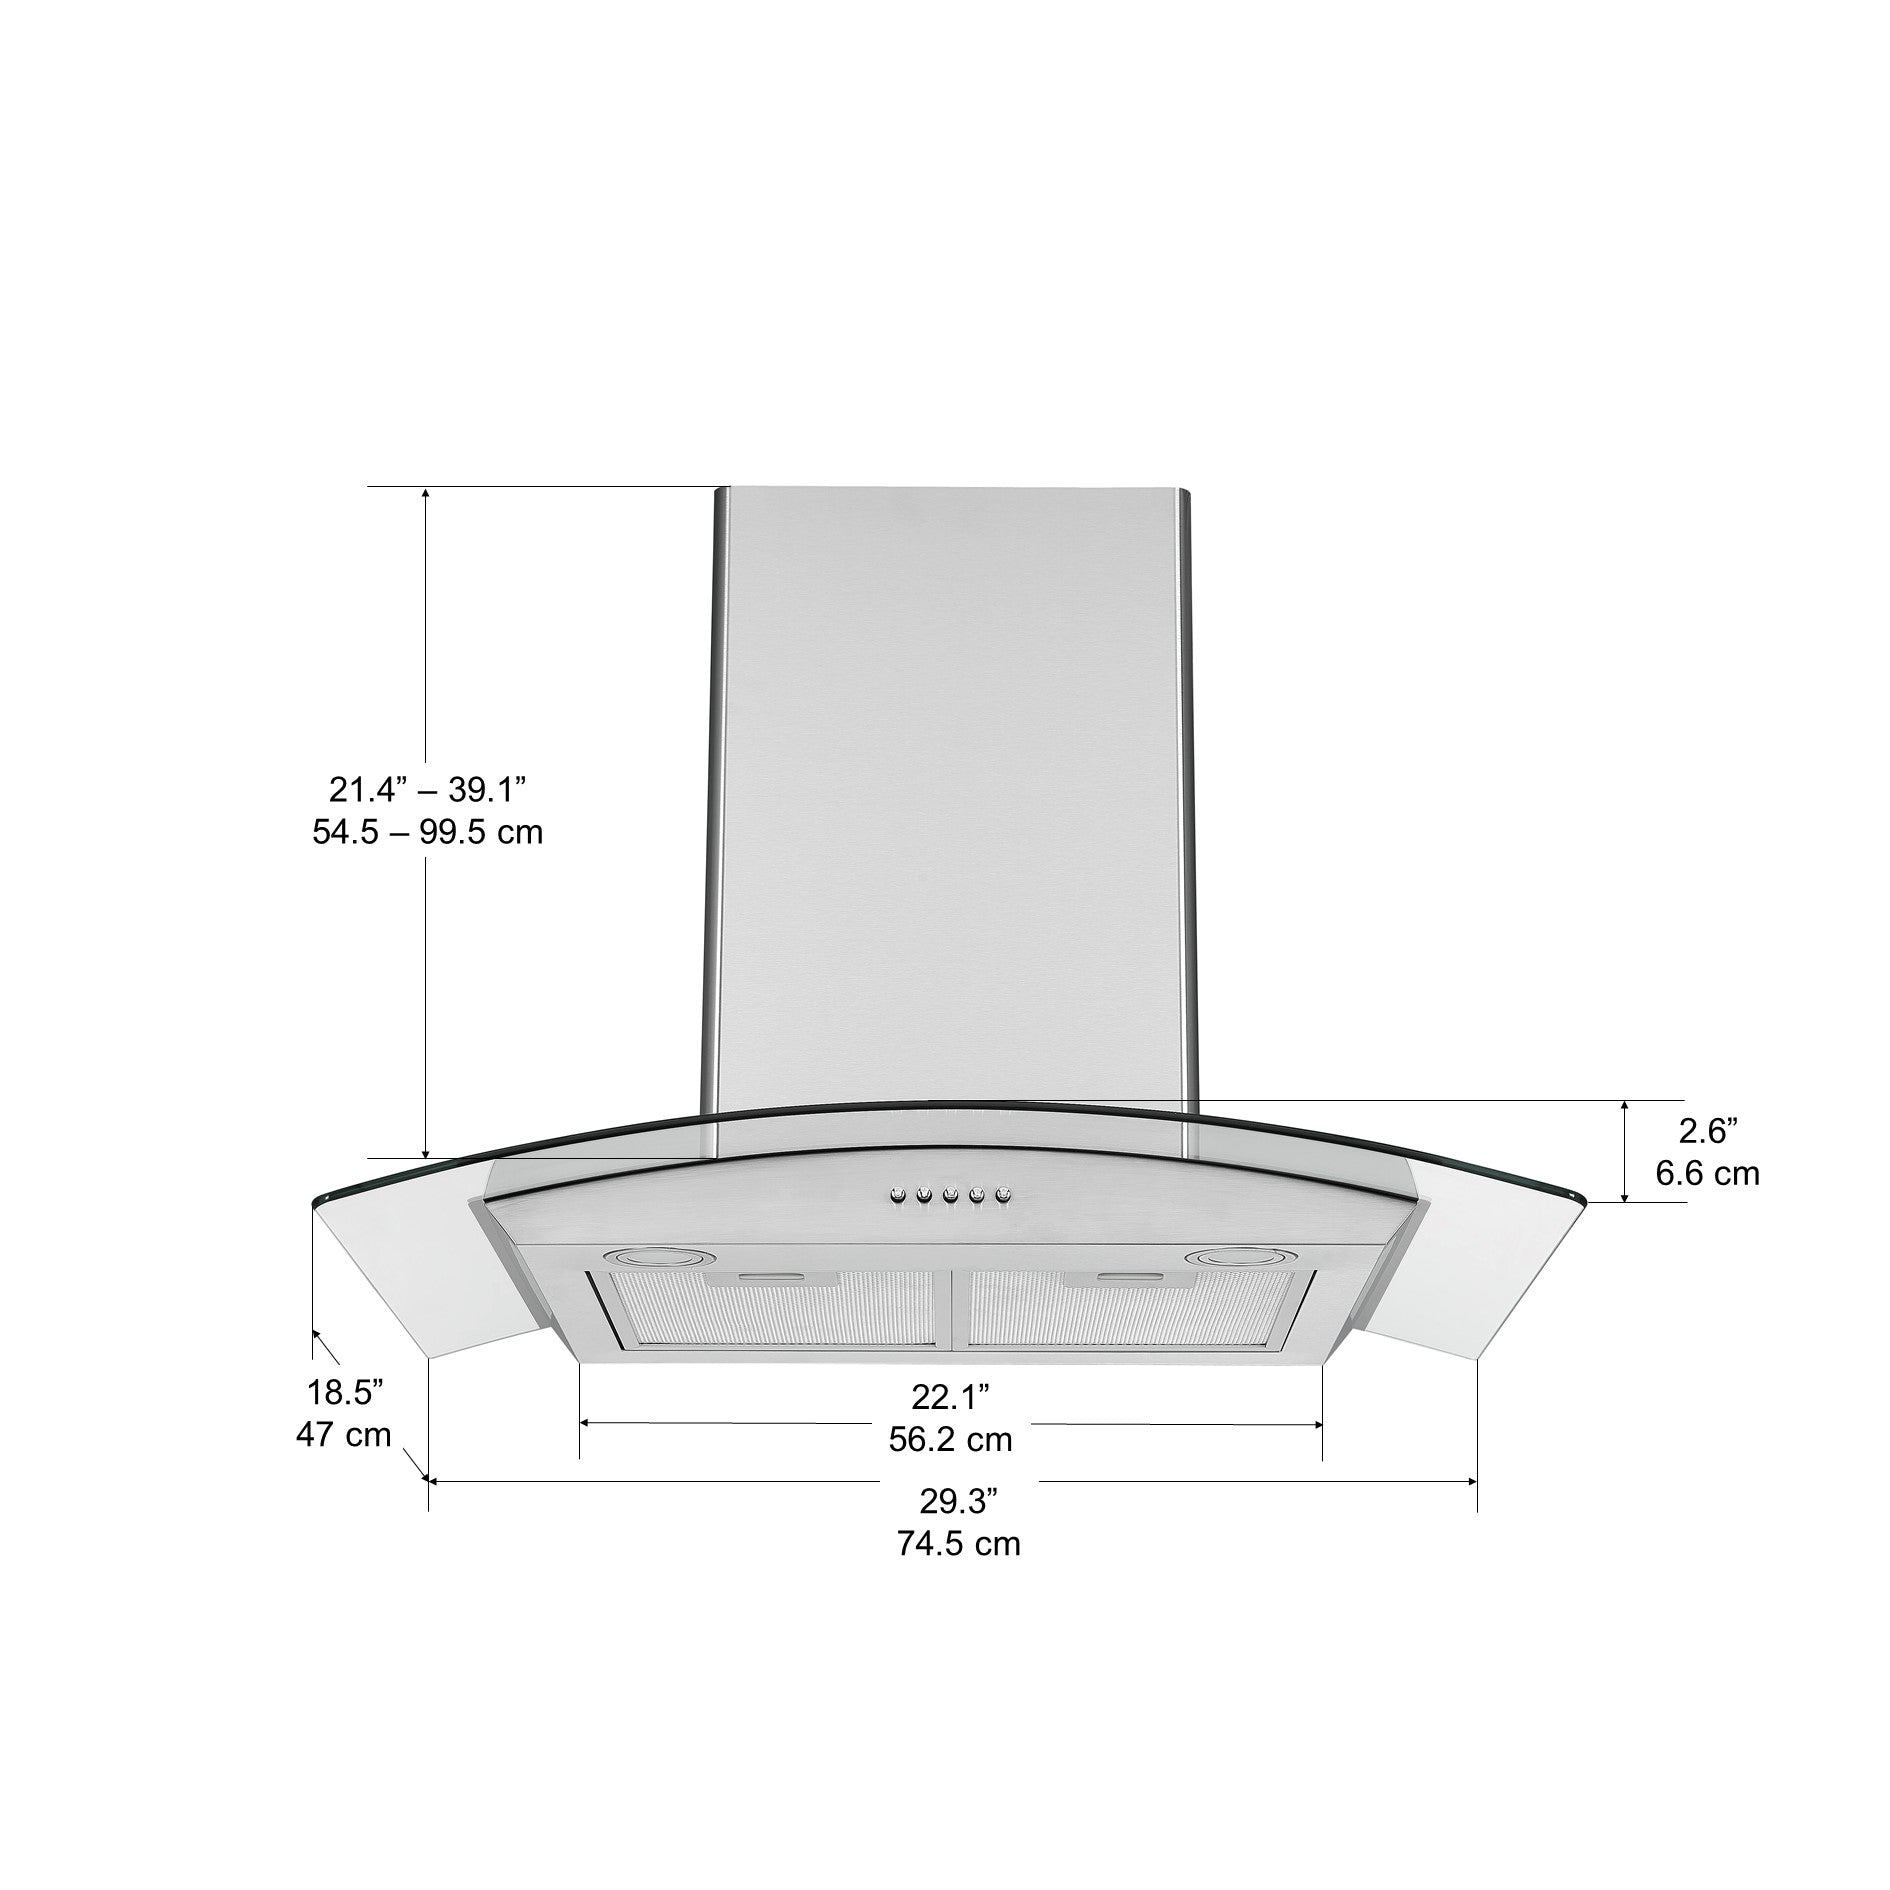 30 in. Convertible Wall-Mounted Glass Canopy Range Hood in Stainless Steel